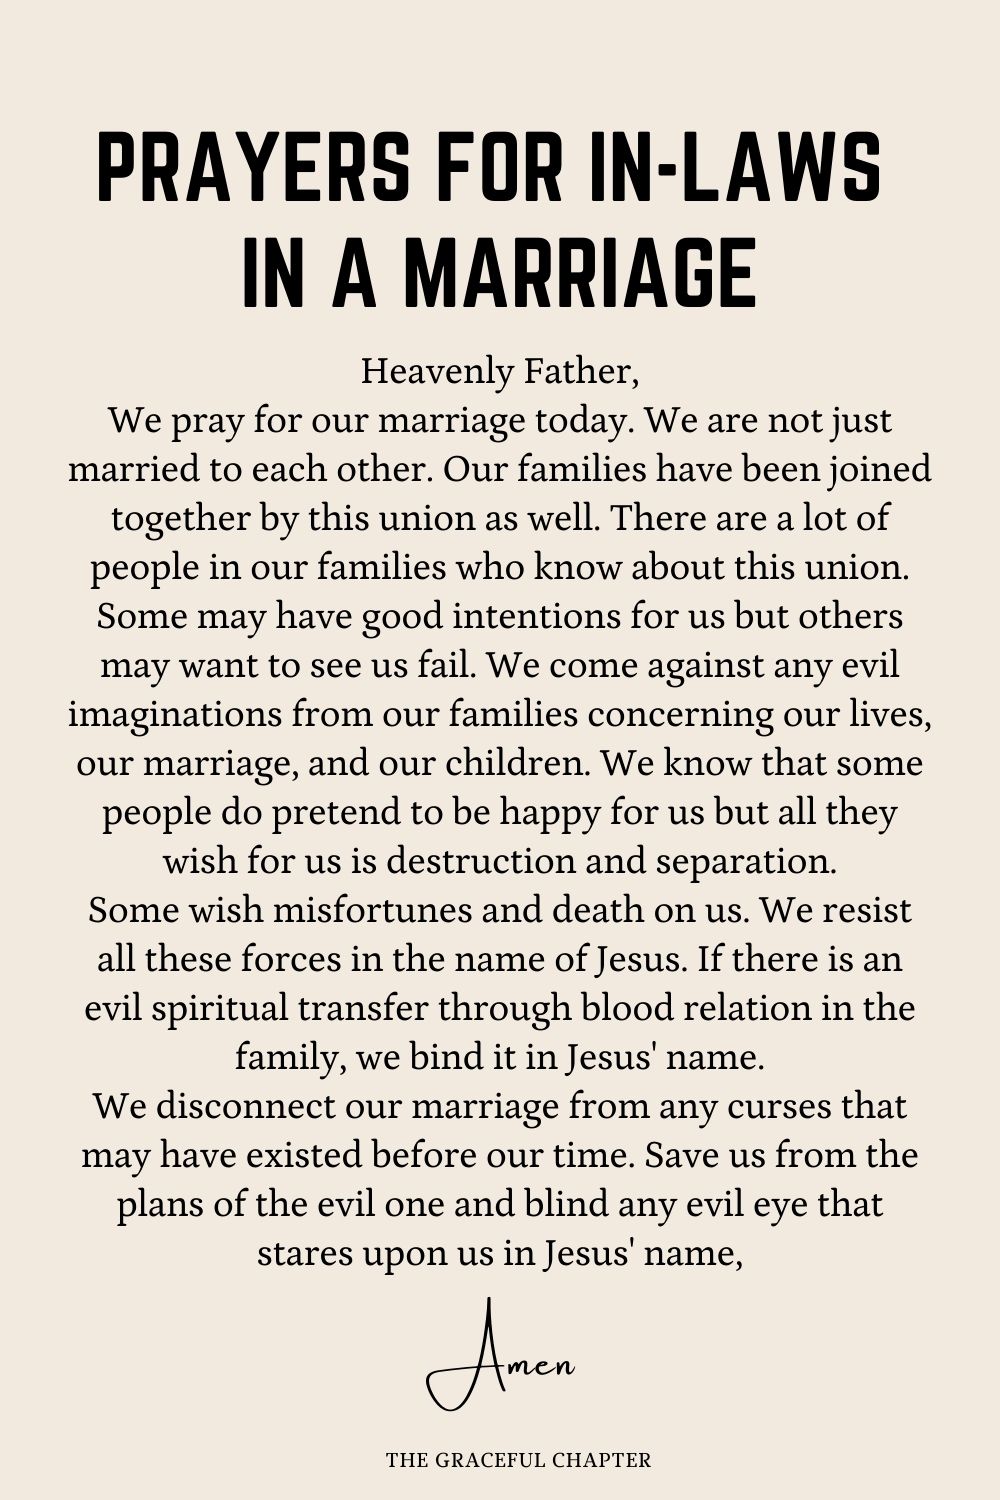 Prayers for In-Laws in a Marriage